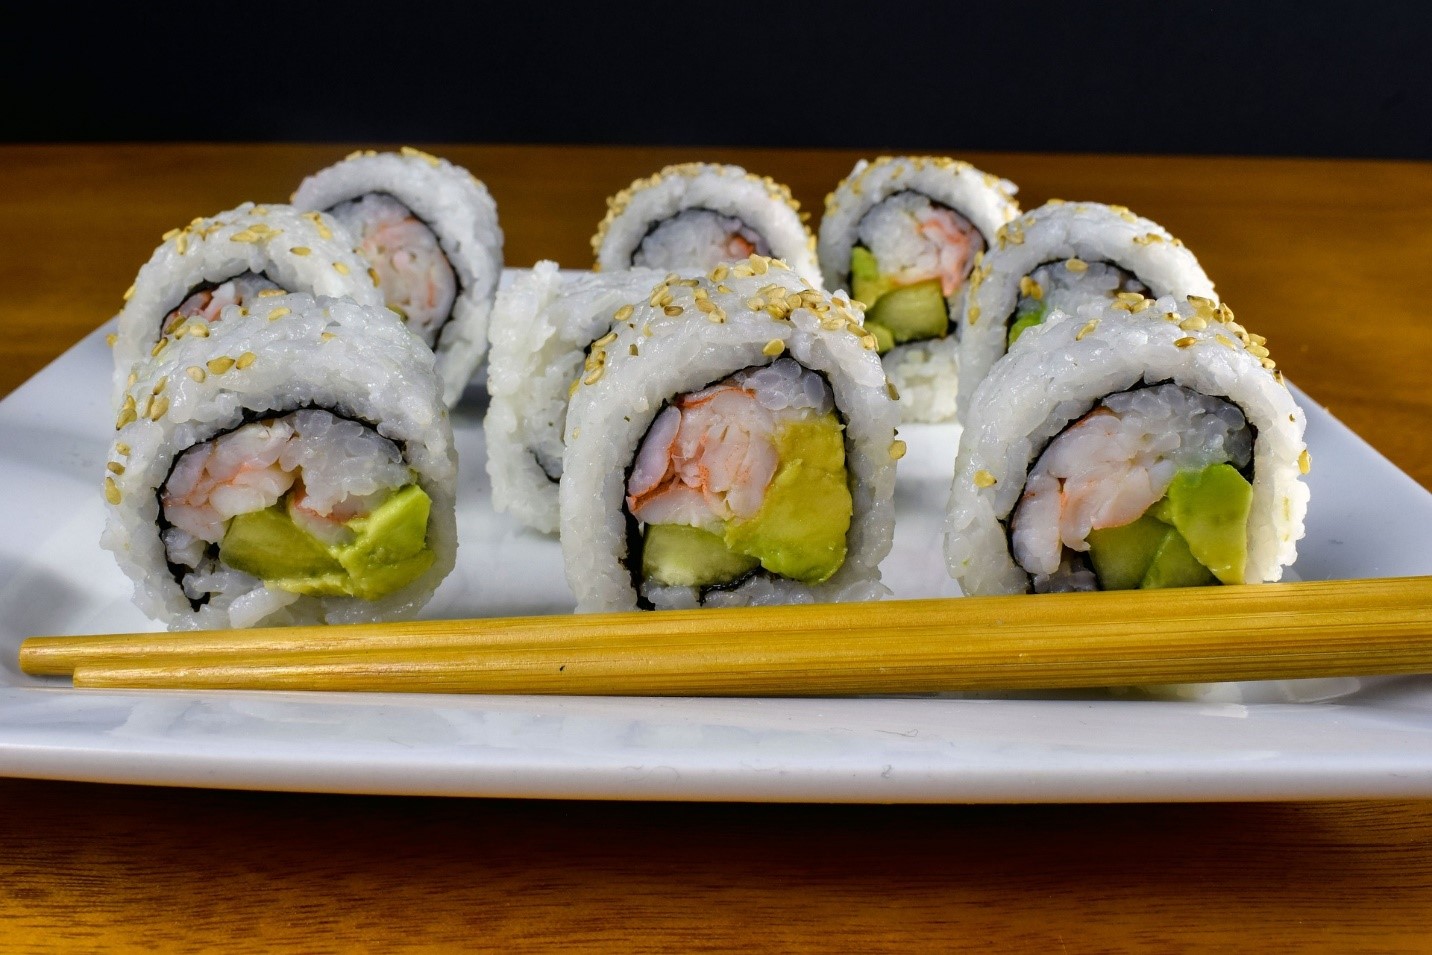 How to Make California Roll at Home